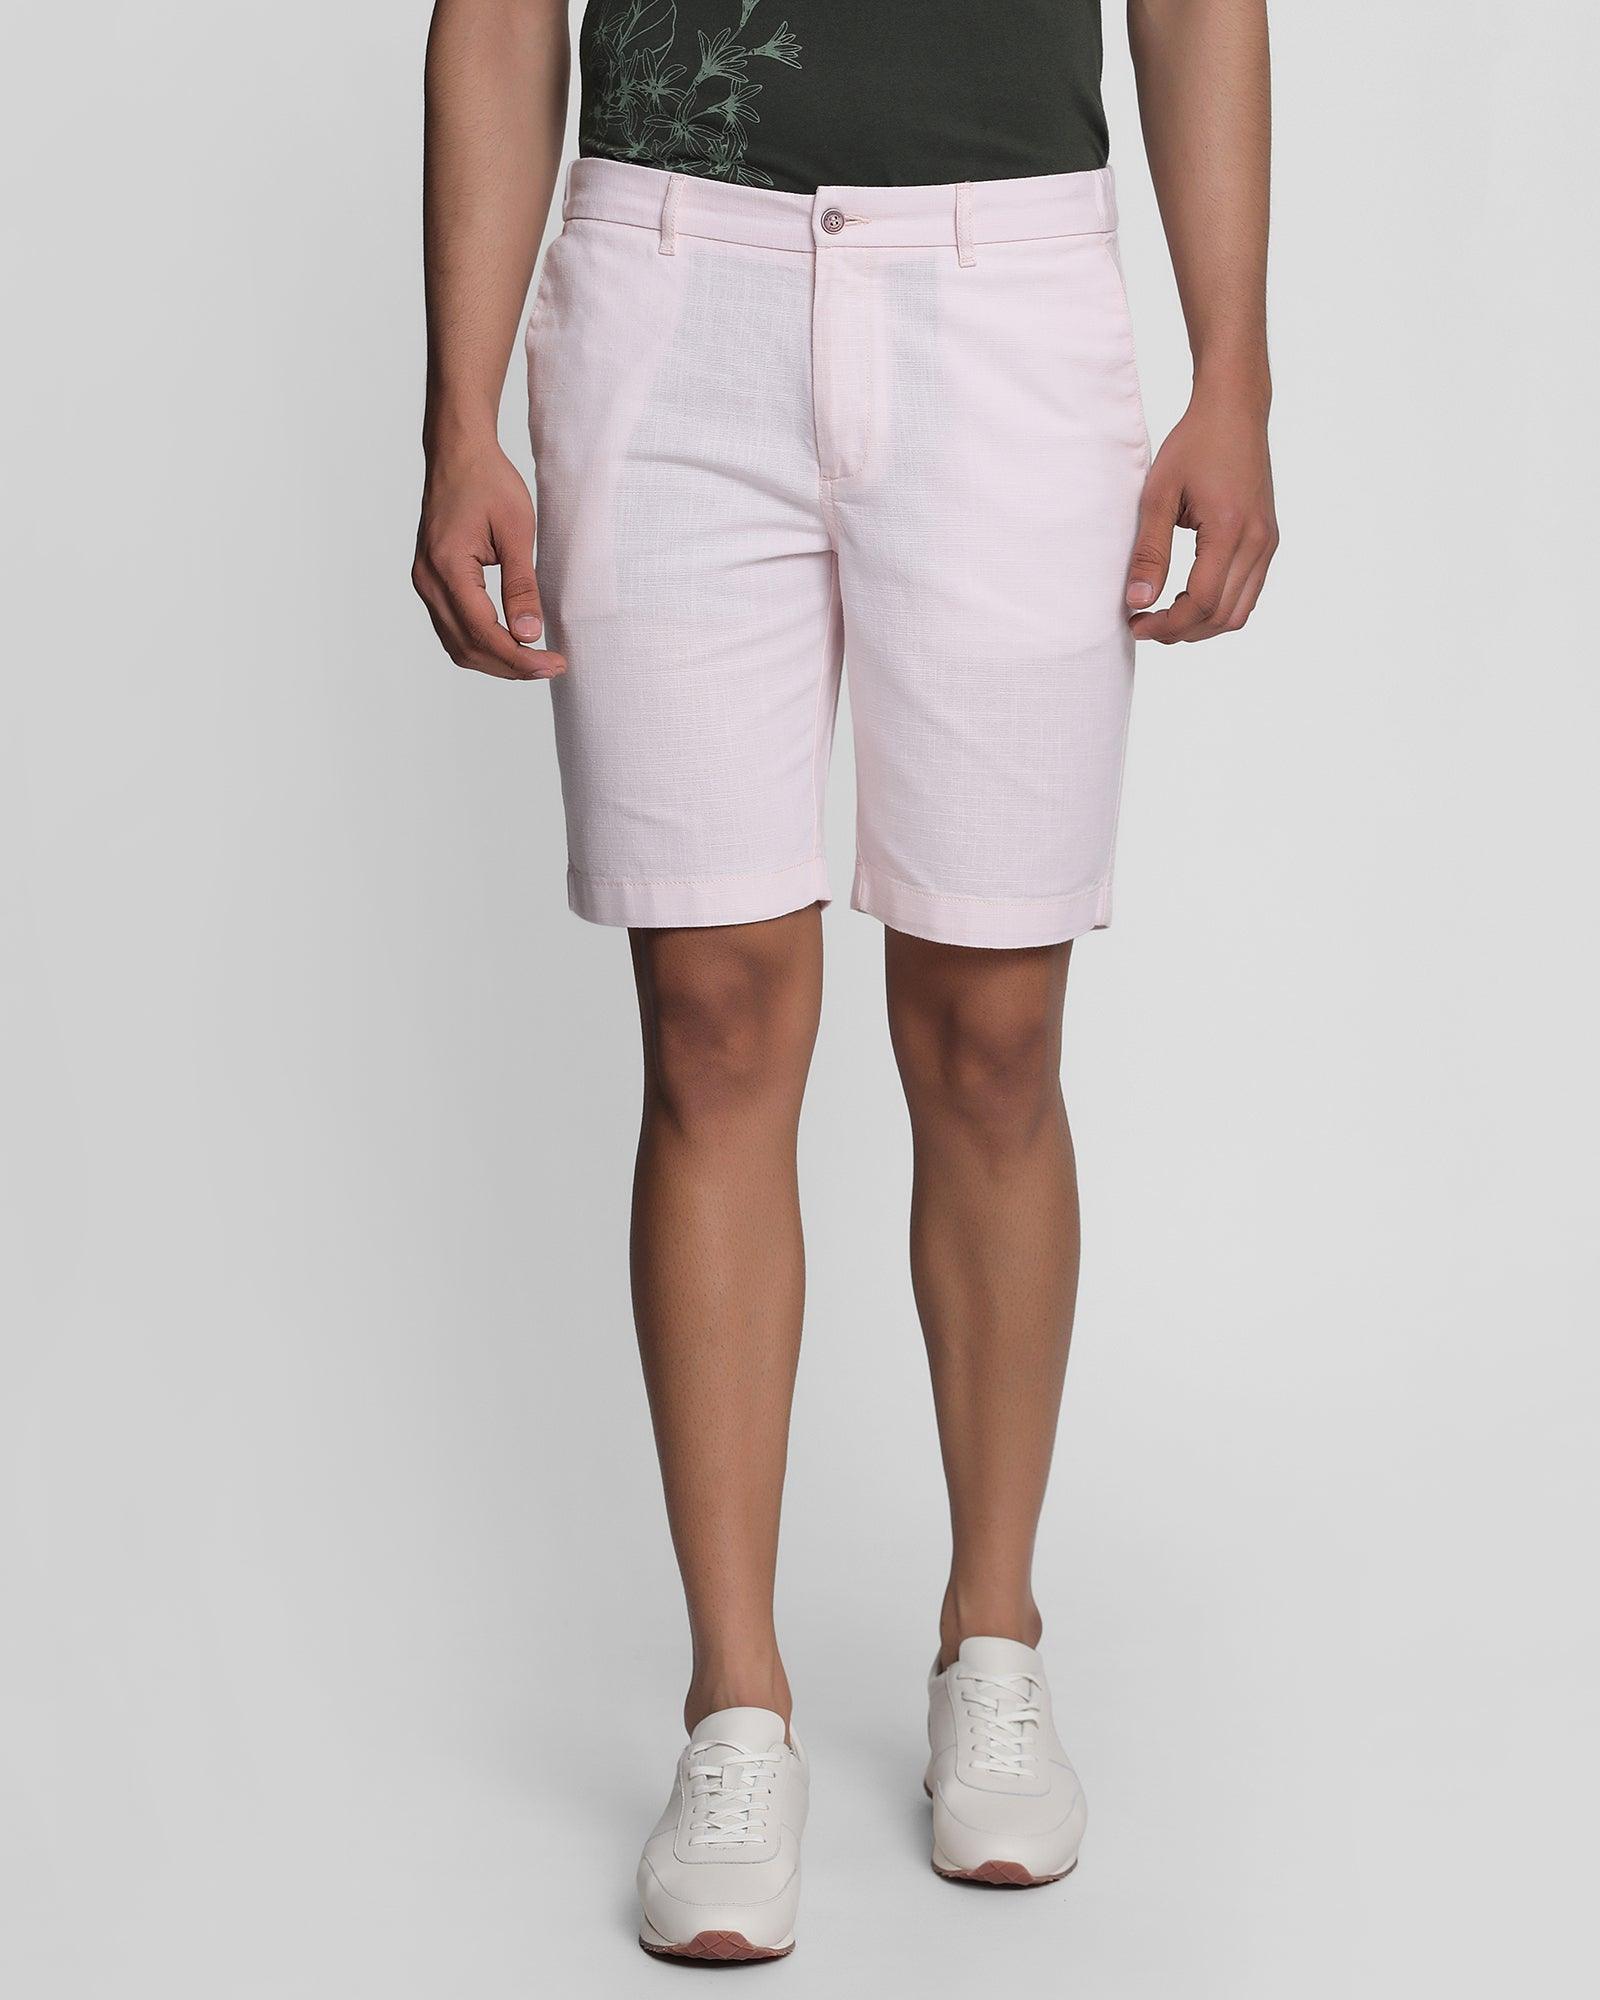 Casual Pink Solid Shorts - Comet